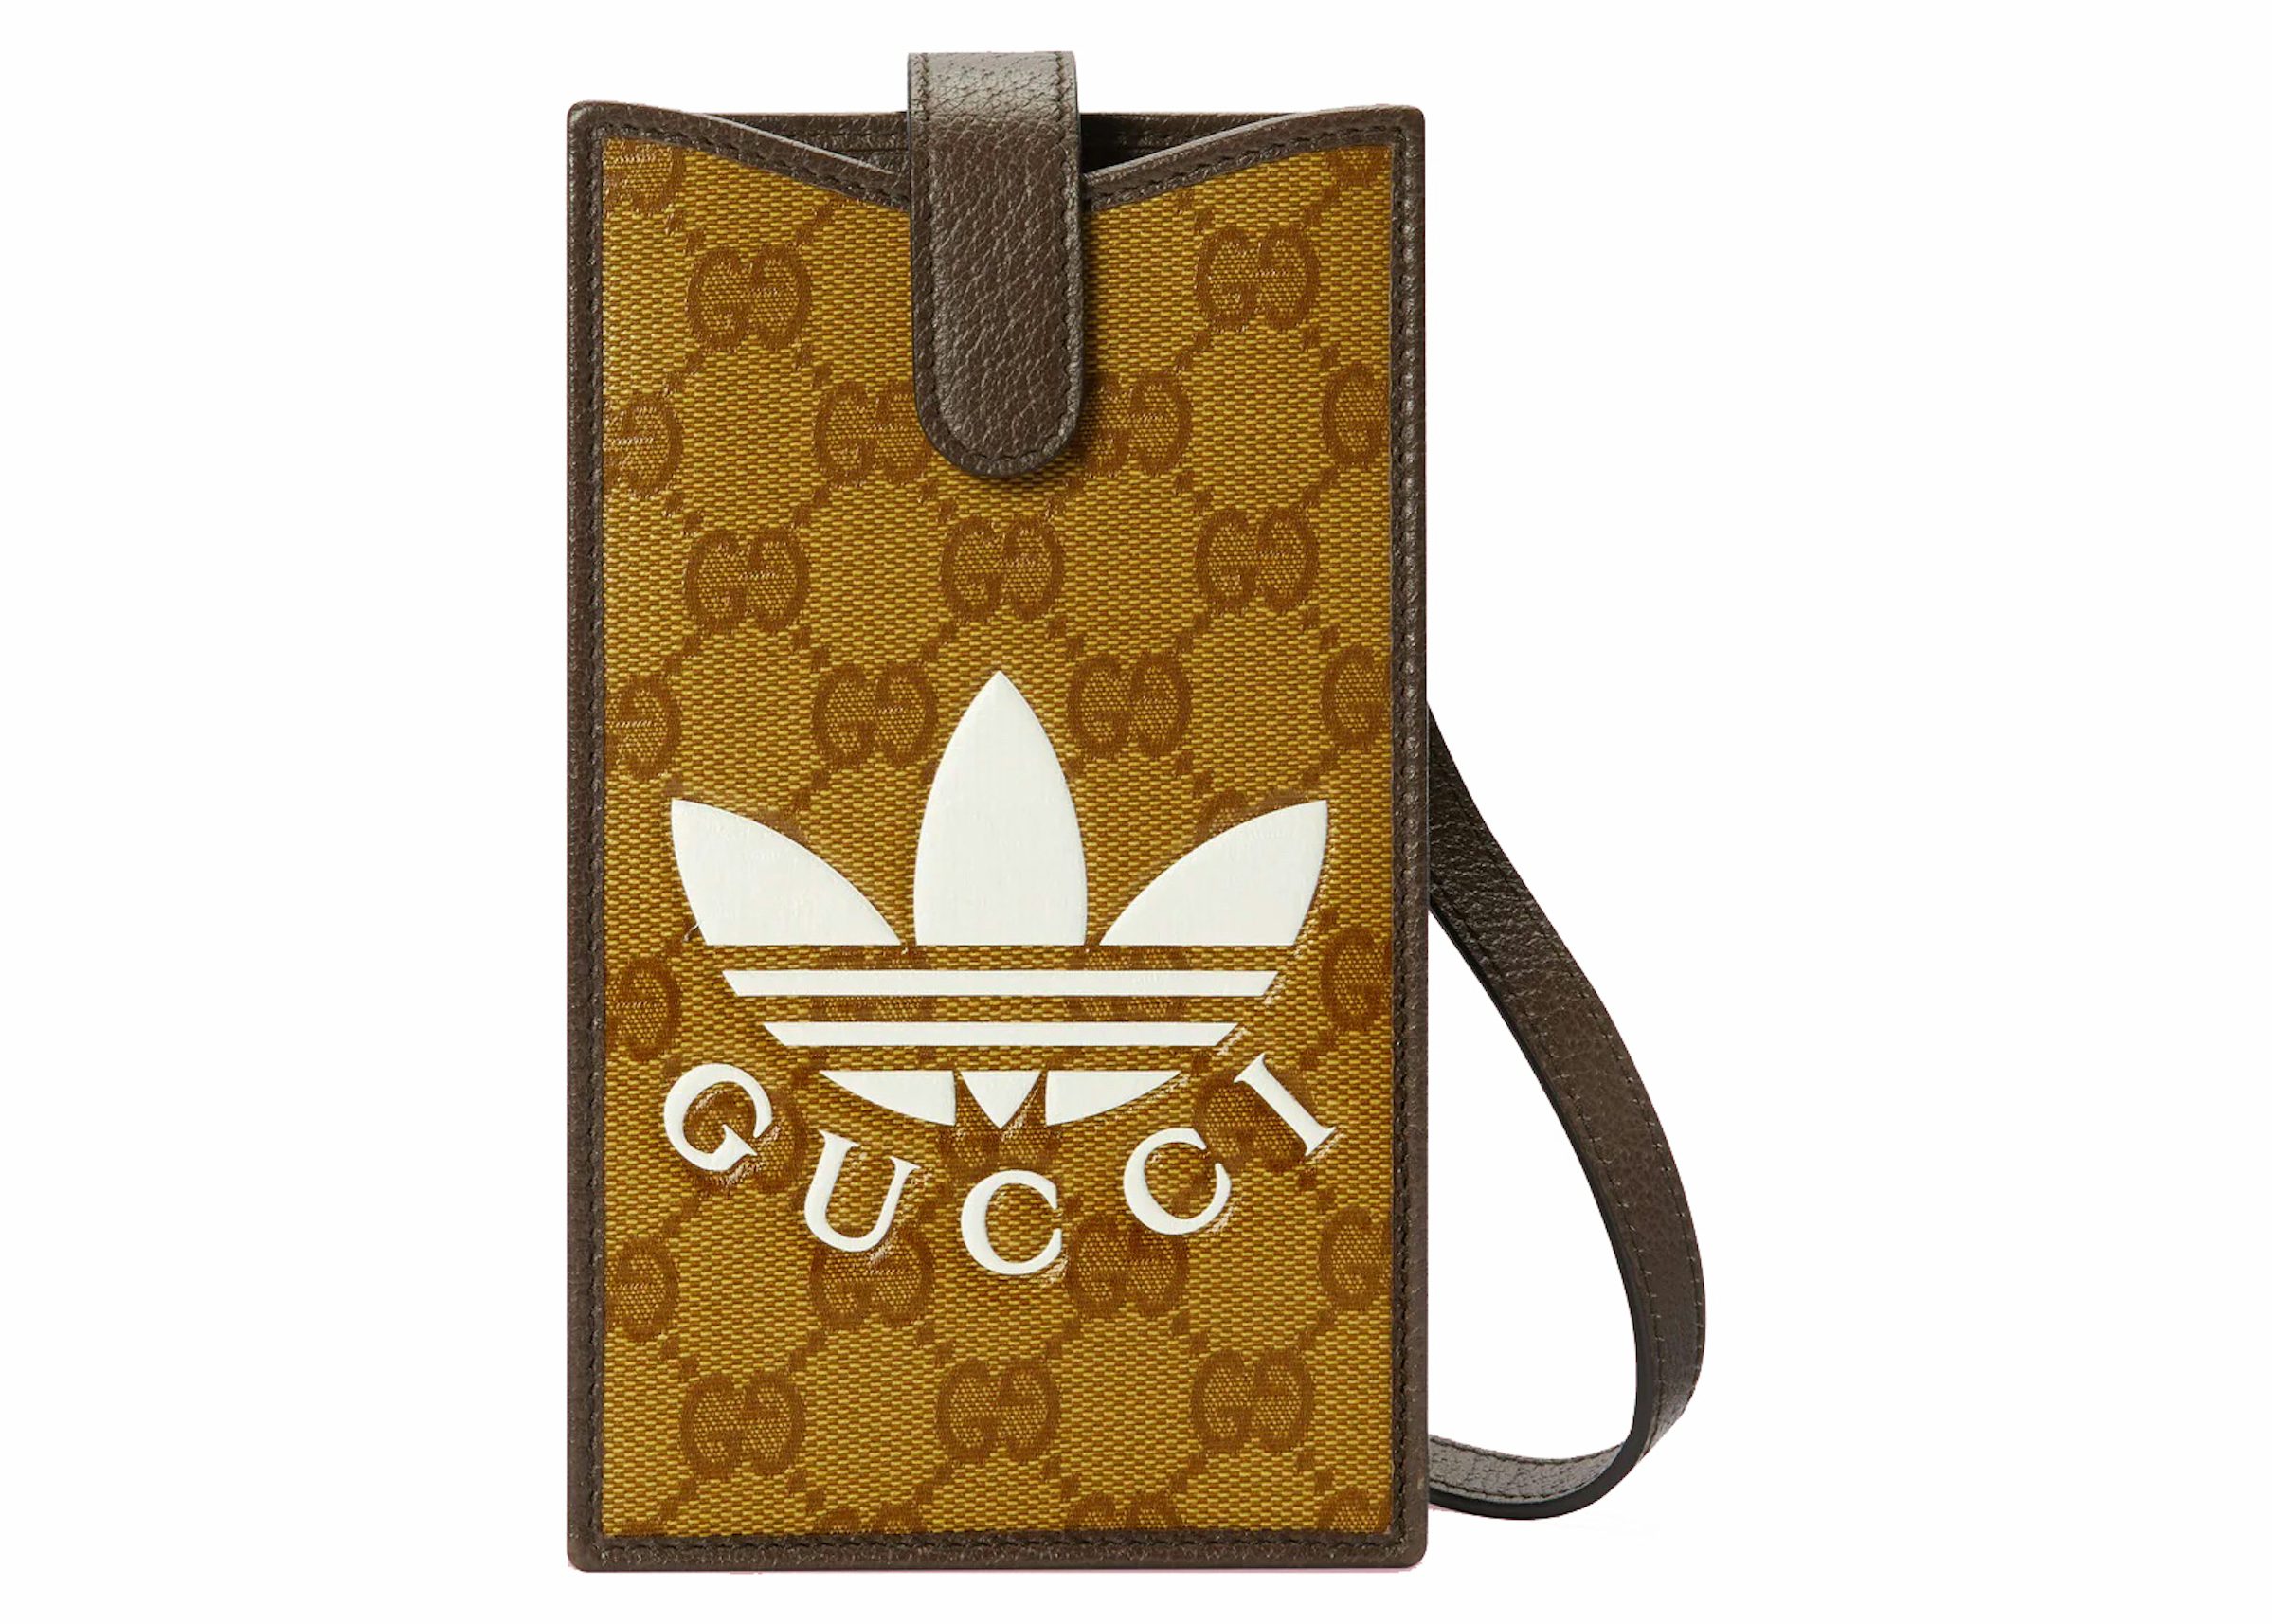 26 Gucci phone cases ! ideas  phone cases, iphone cases, iphone